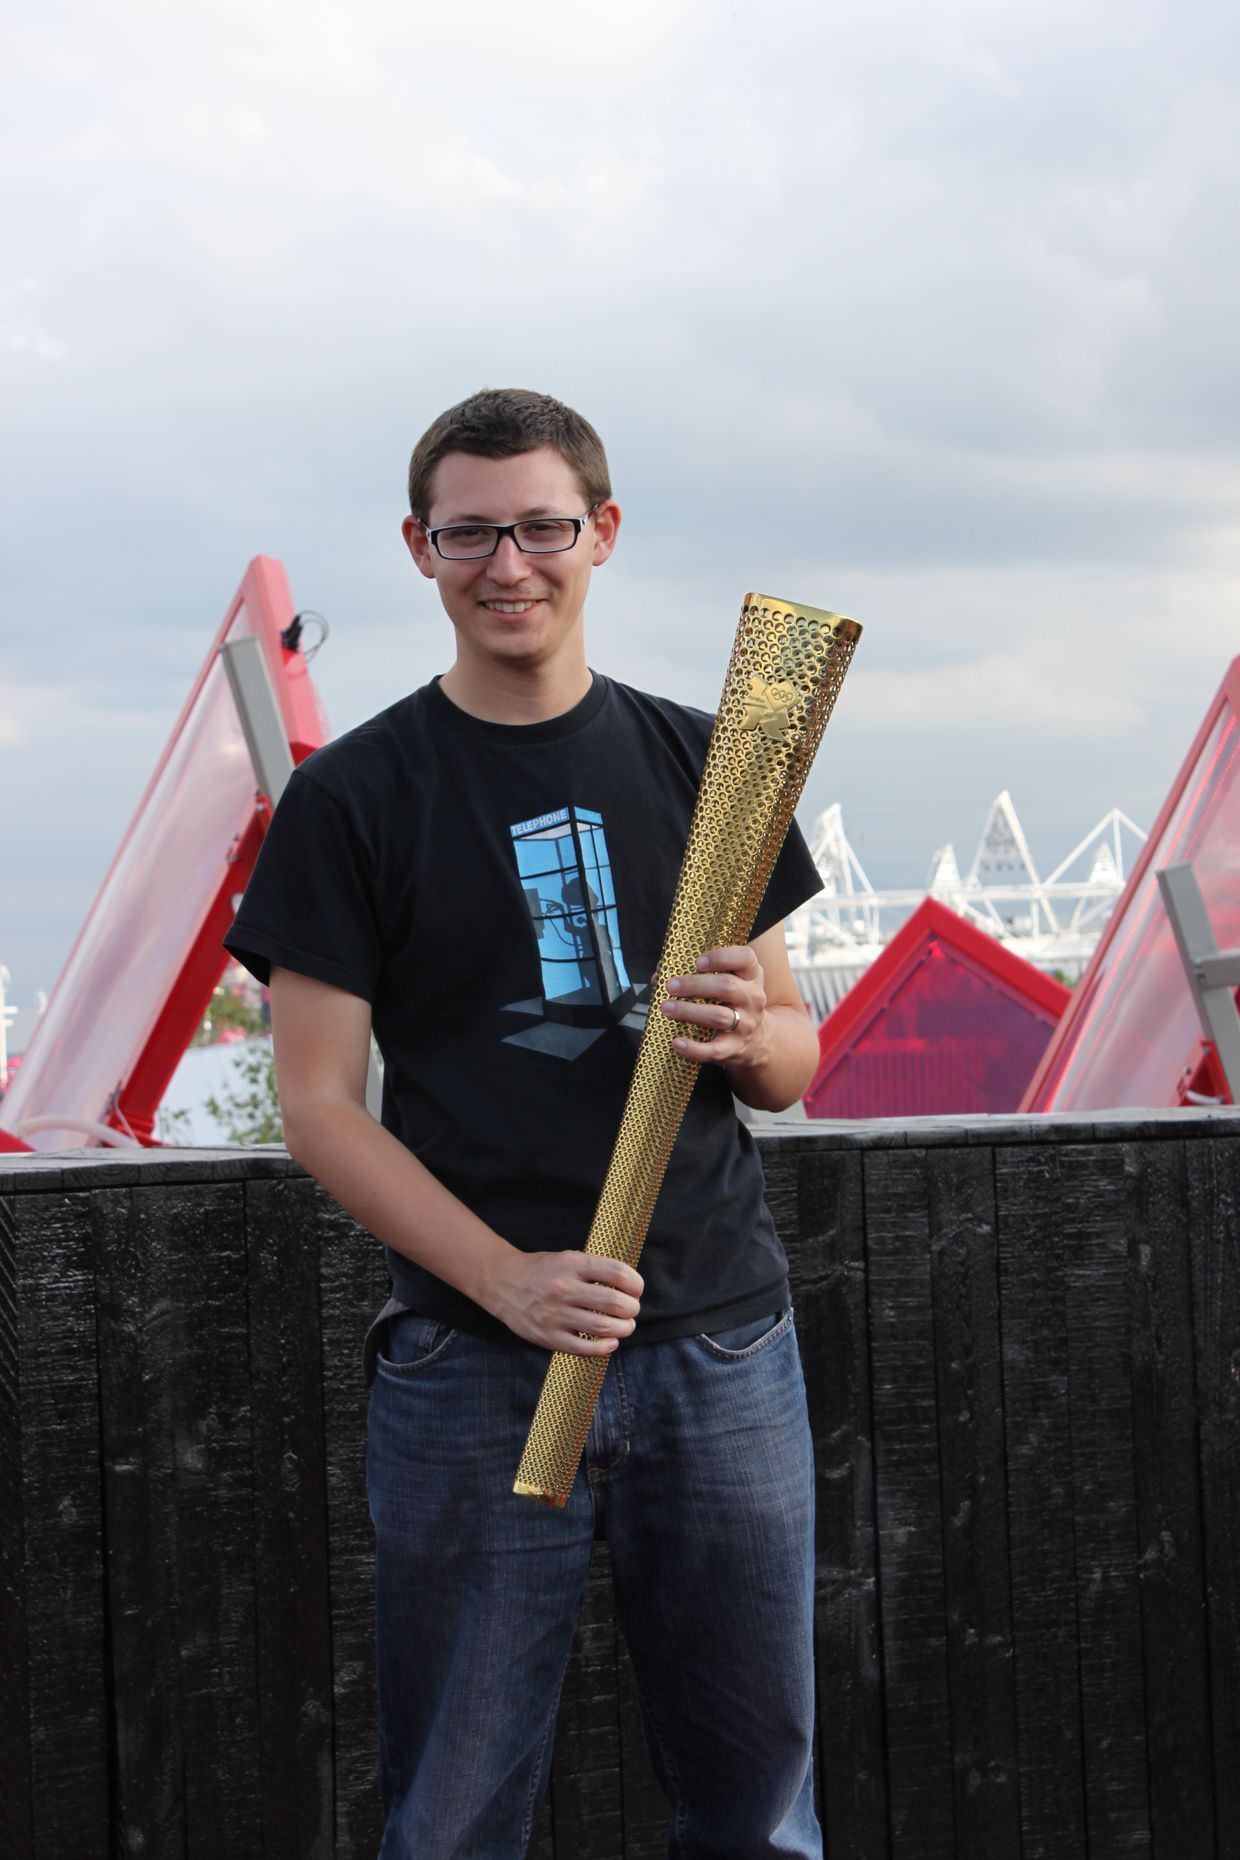 Paul holding the olympic torch